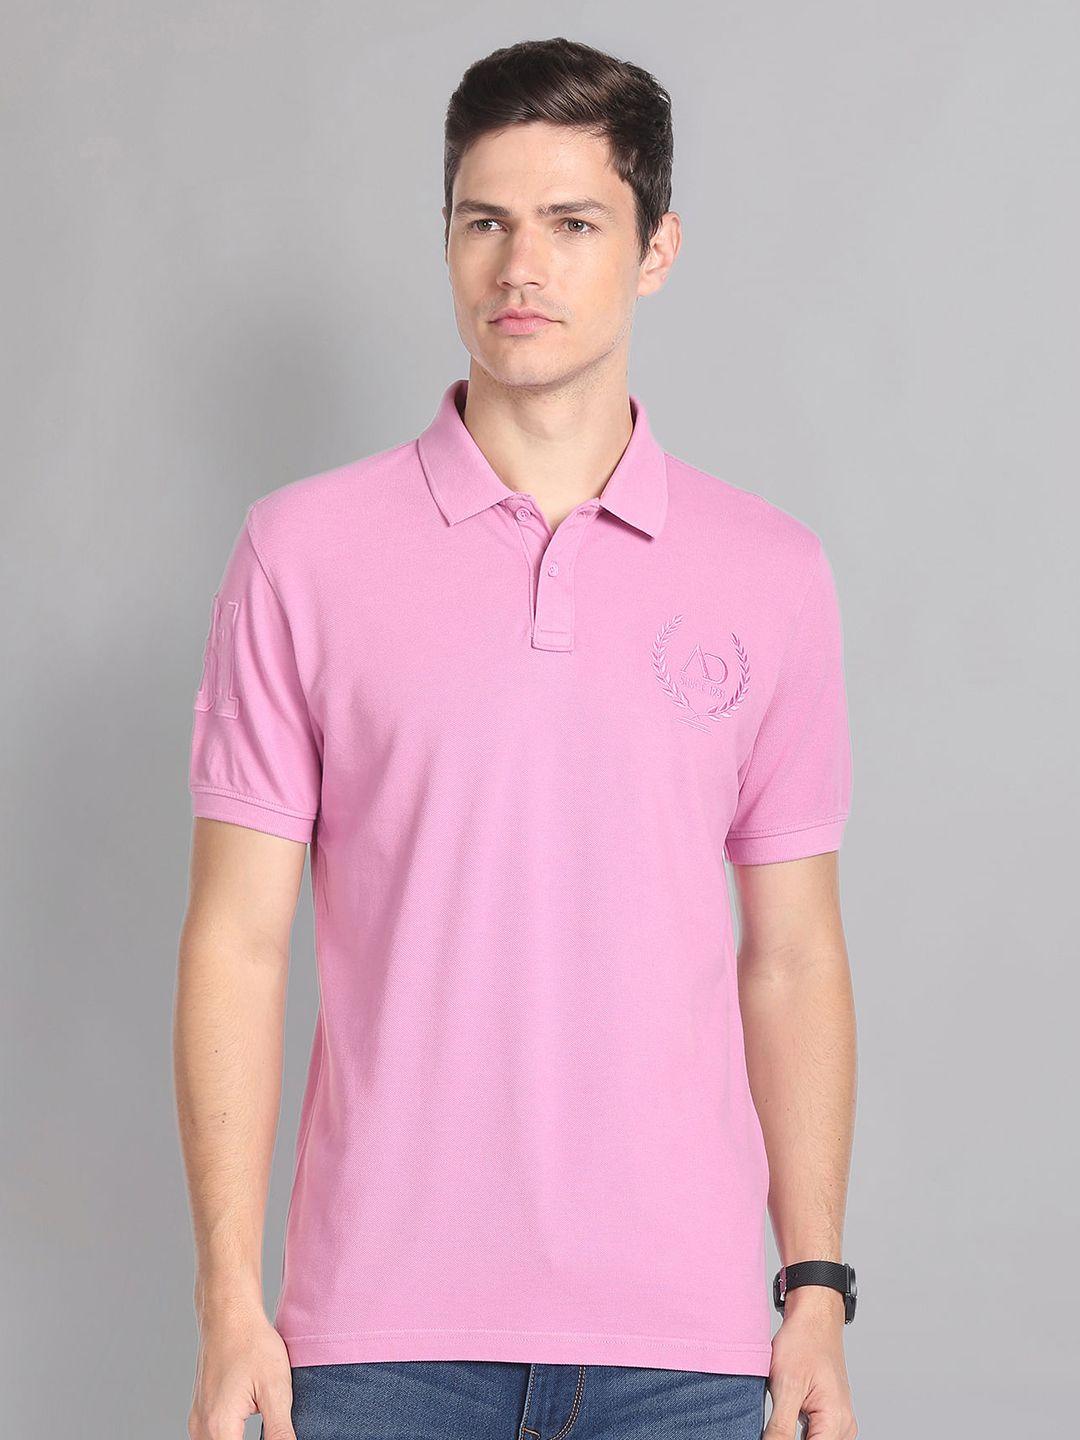 ad-by-arvind-embroidered-logo-moistex-finish-polo-collar-slim-fit-pure-cotton-t-shirt